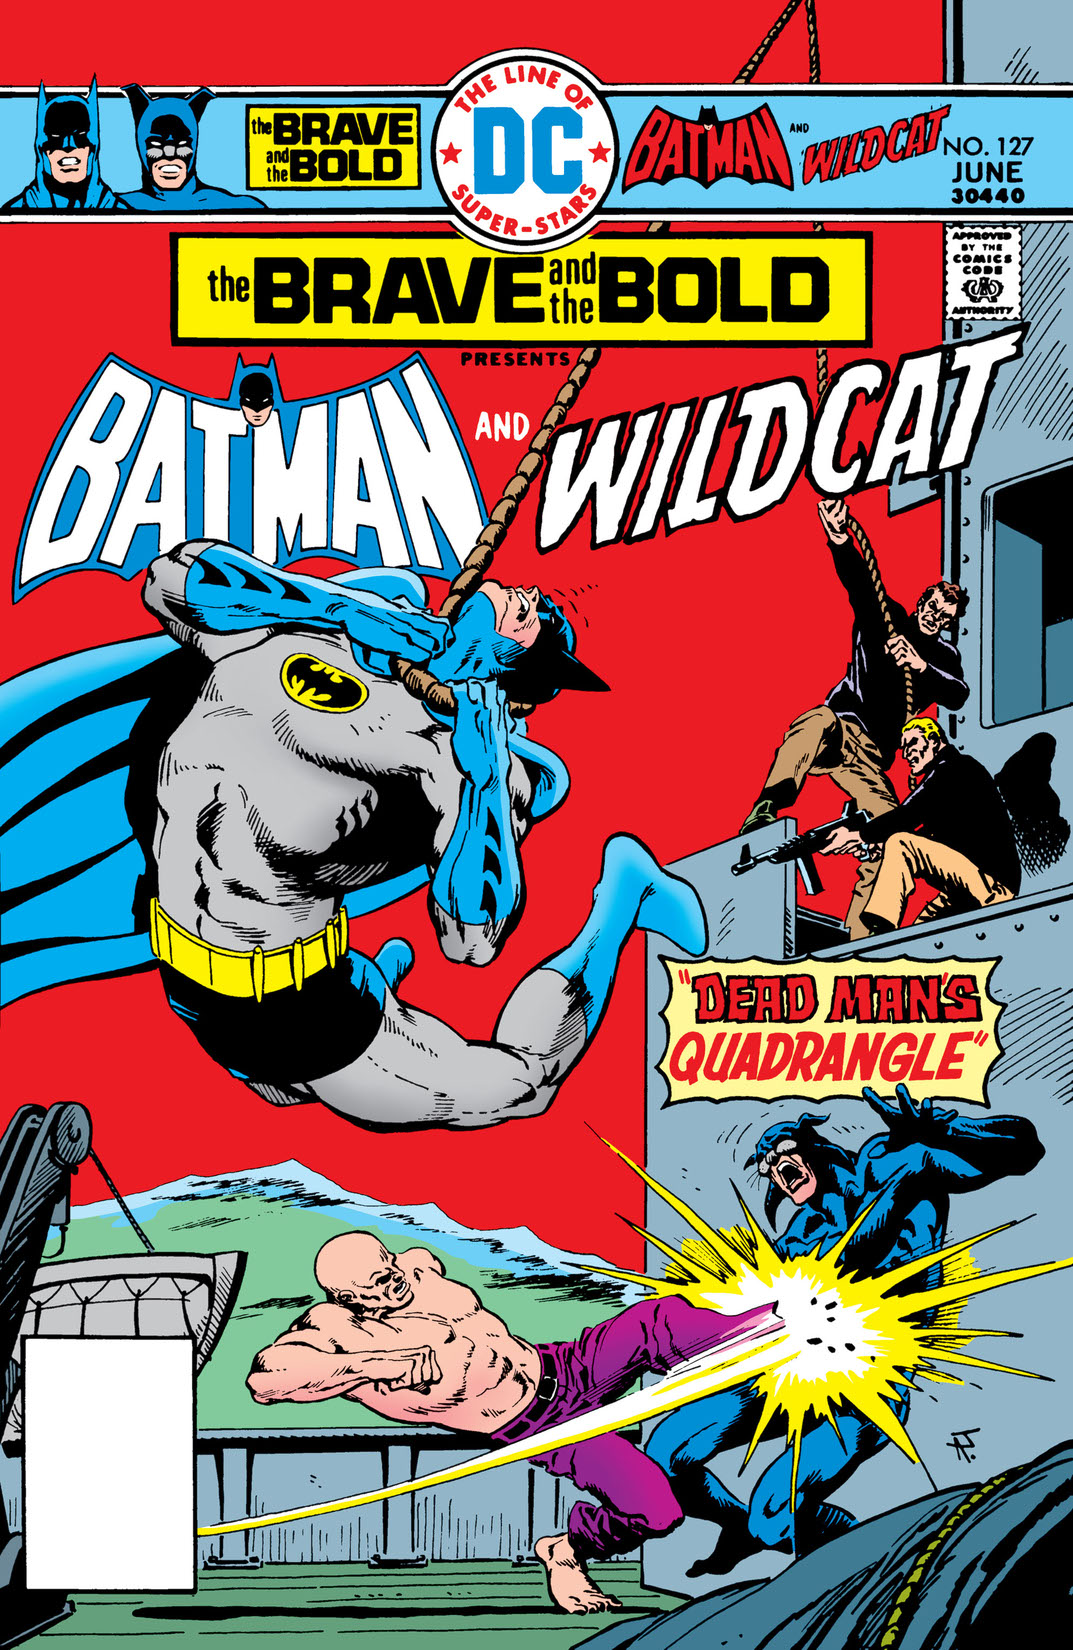 The Brave and the Bold (1955-) #127 preview images